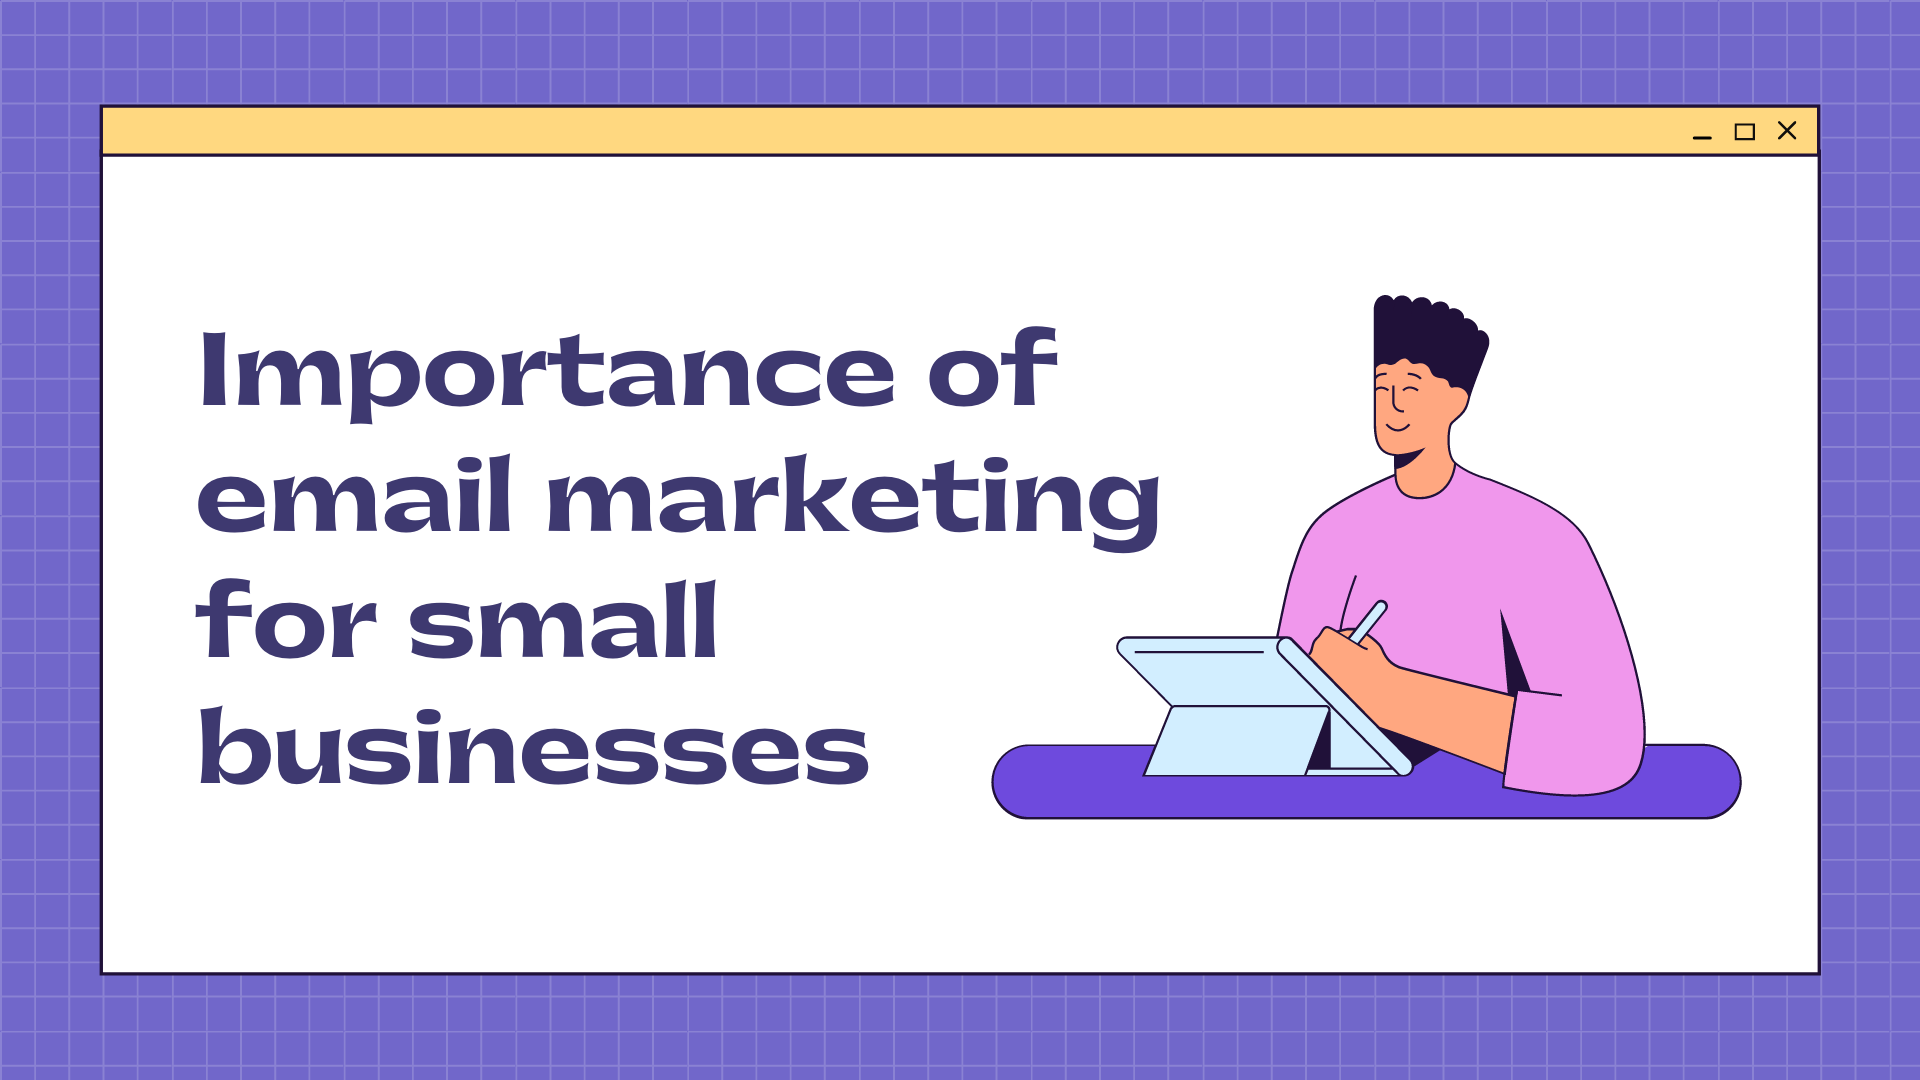 Importance of email marketing for small businesses